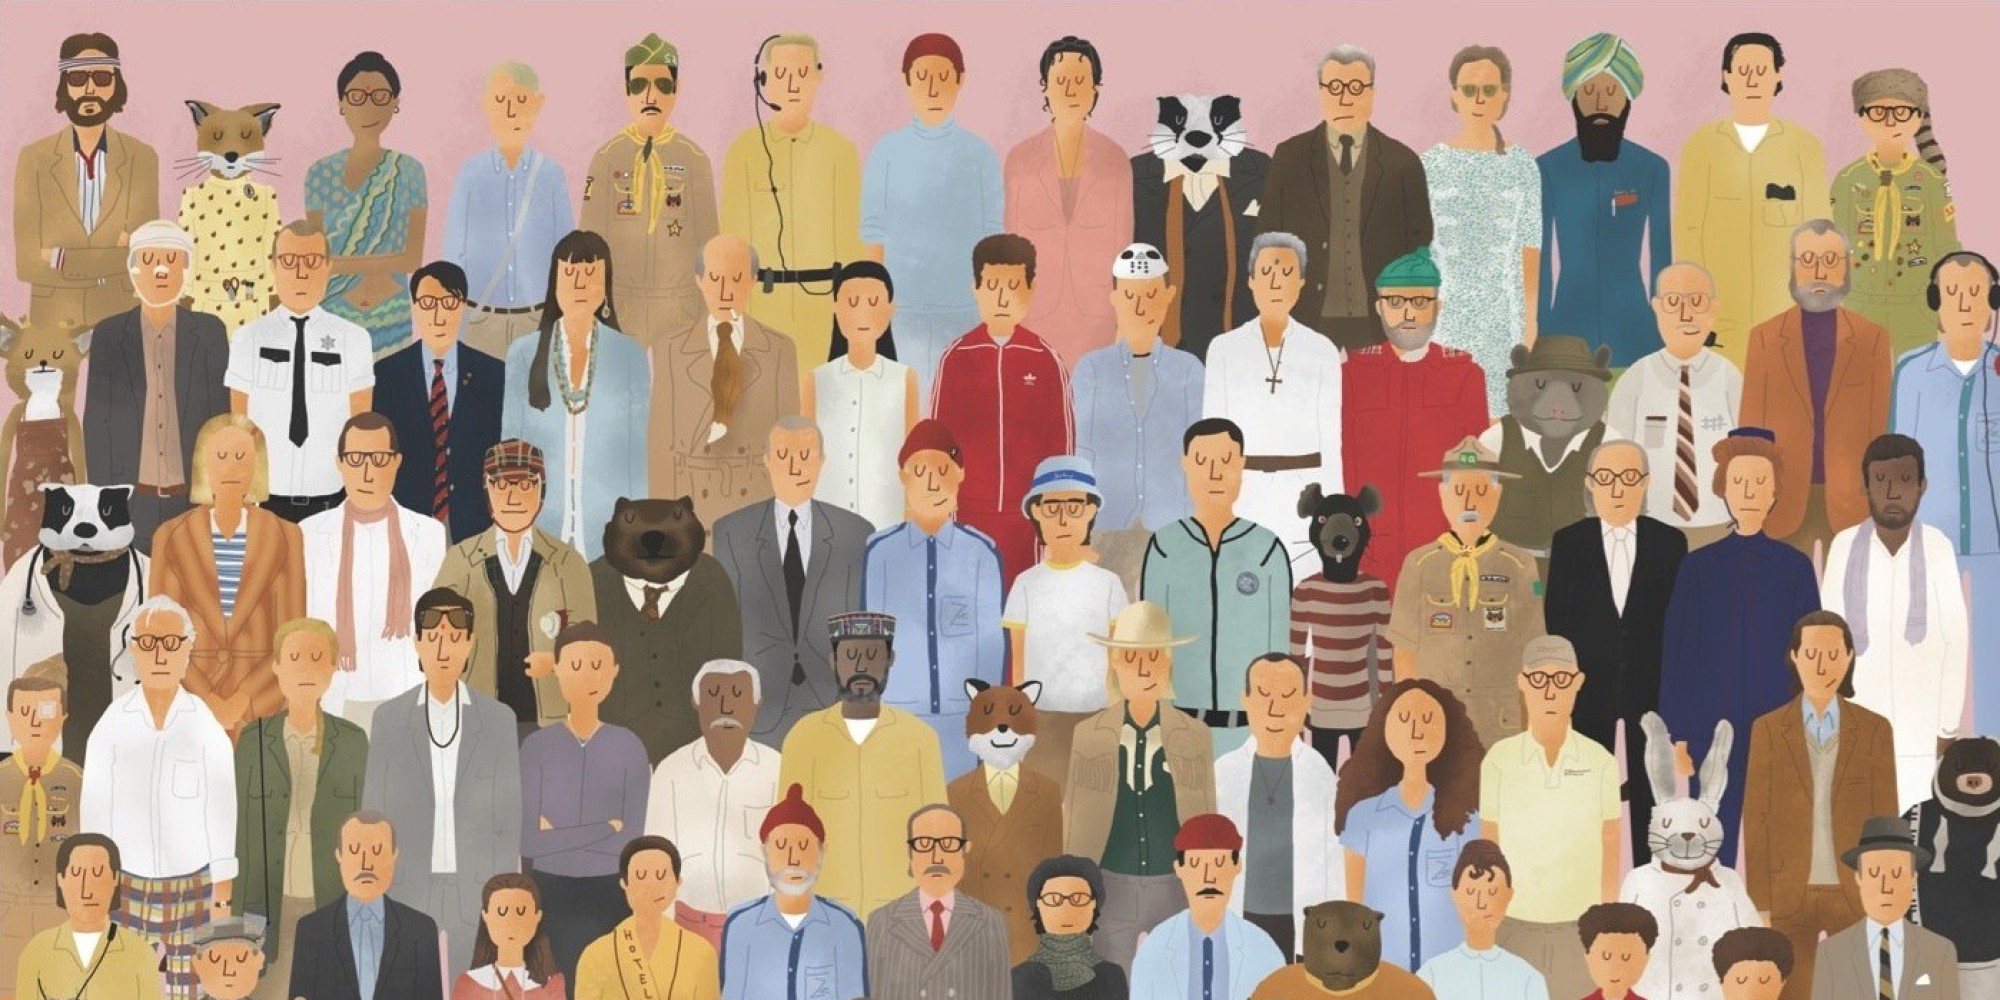 Awesome Art From New Wes Anderson Book Image